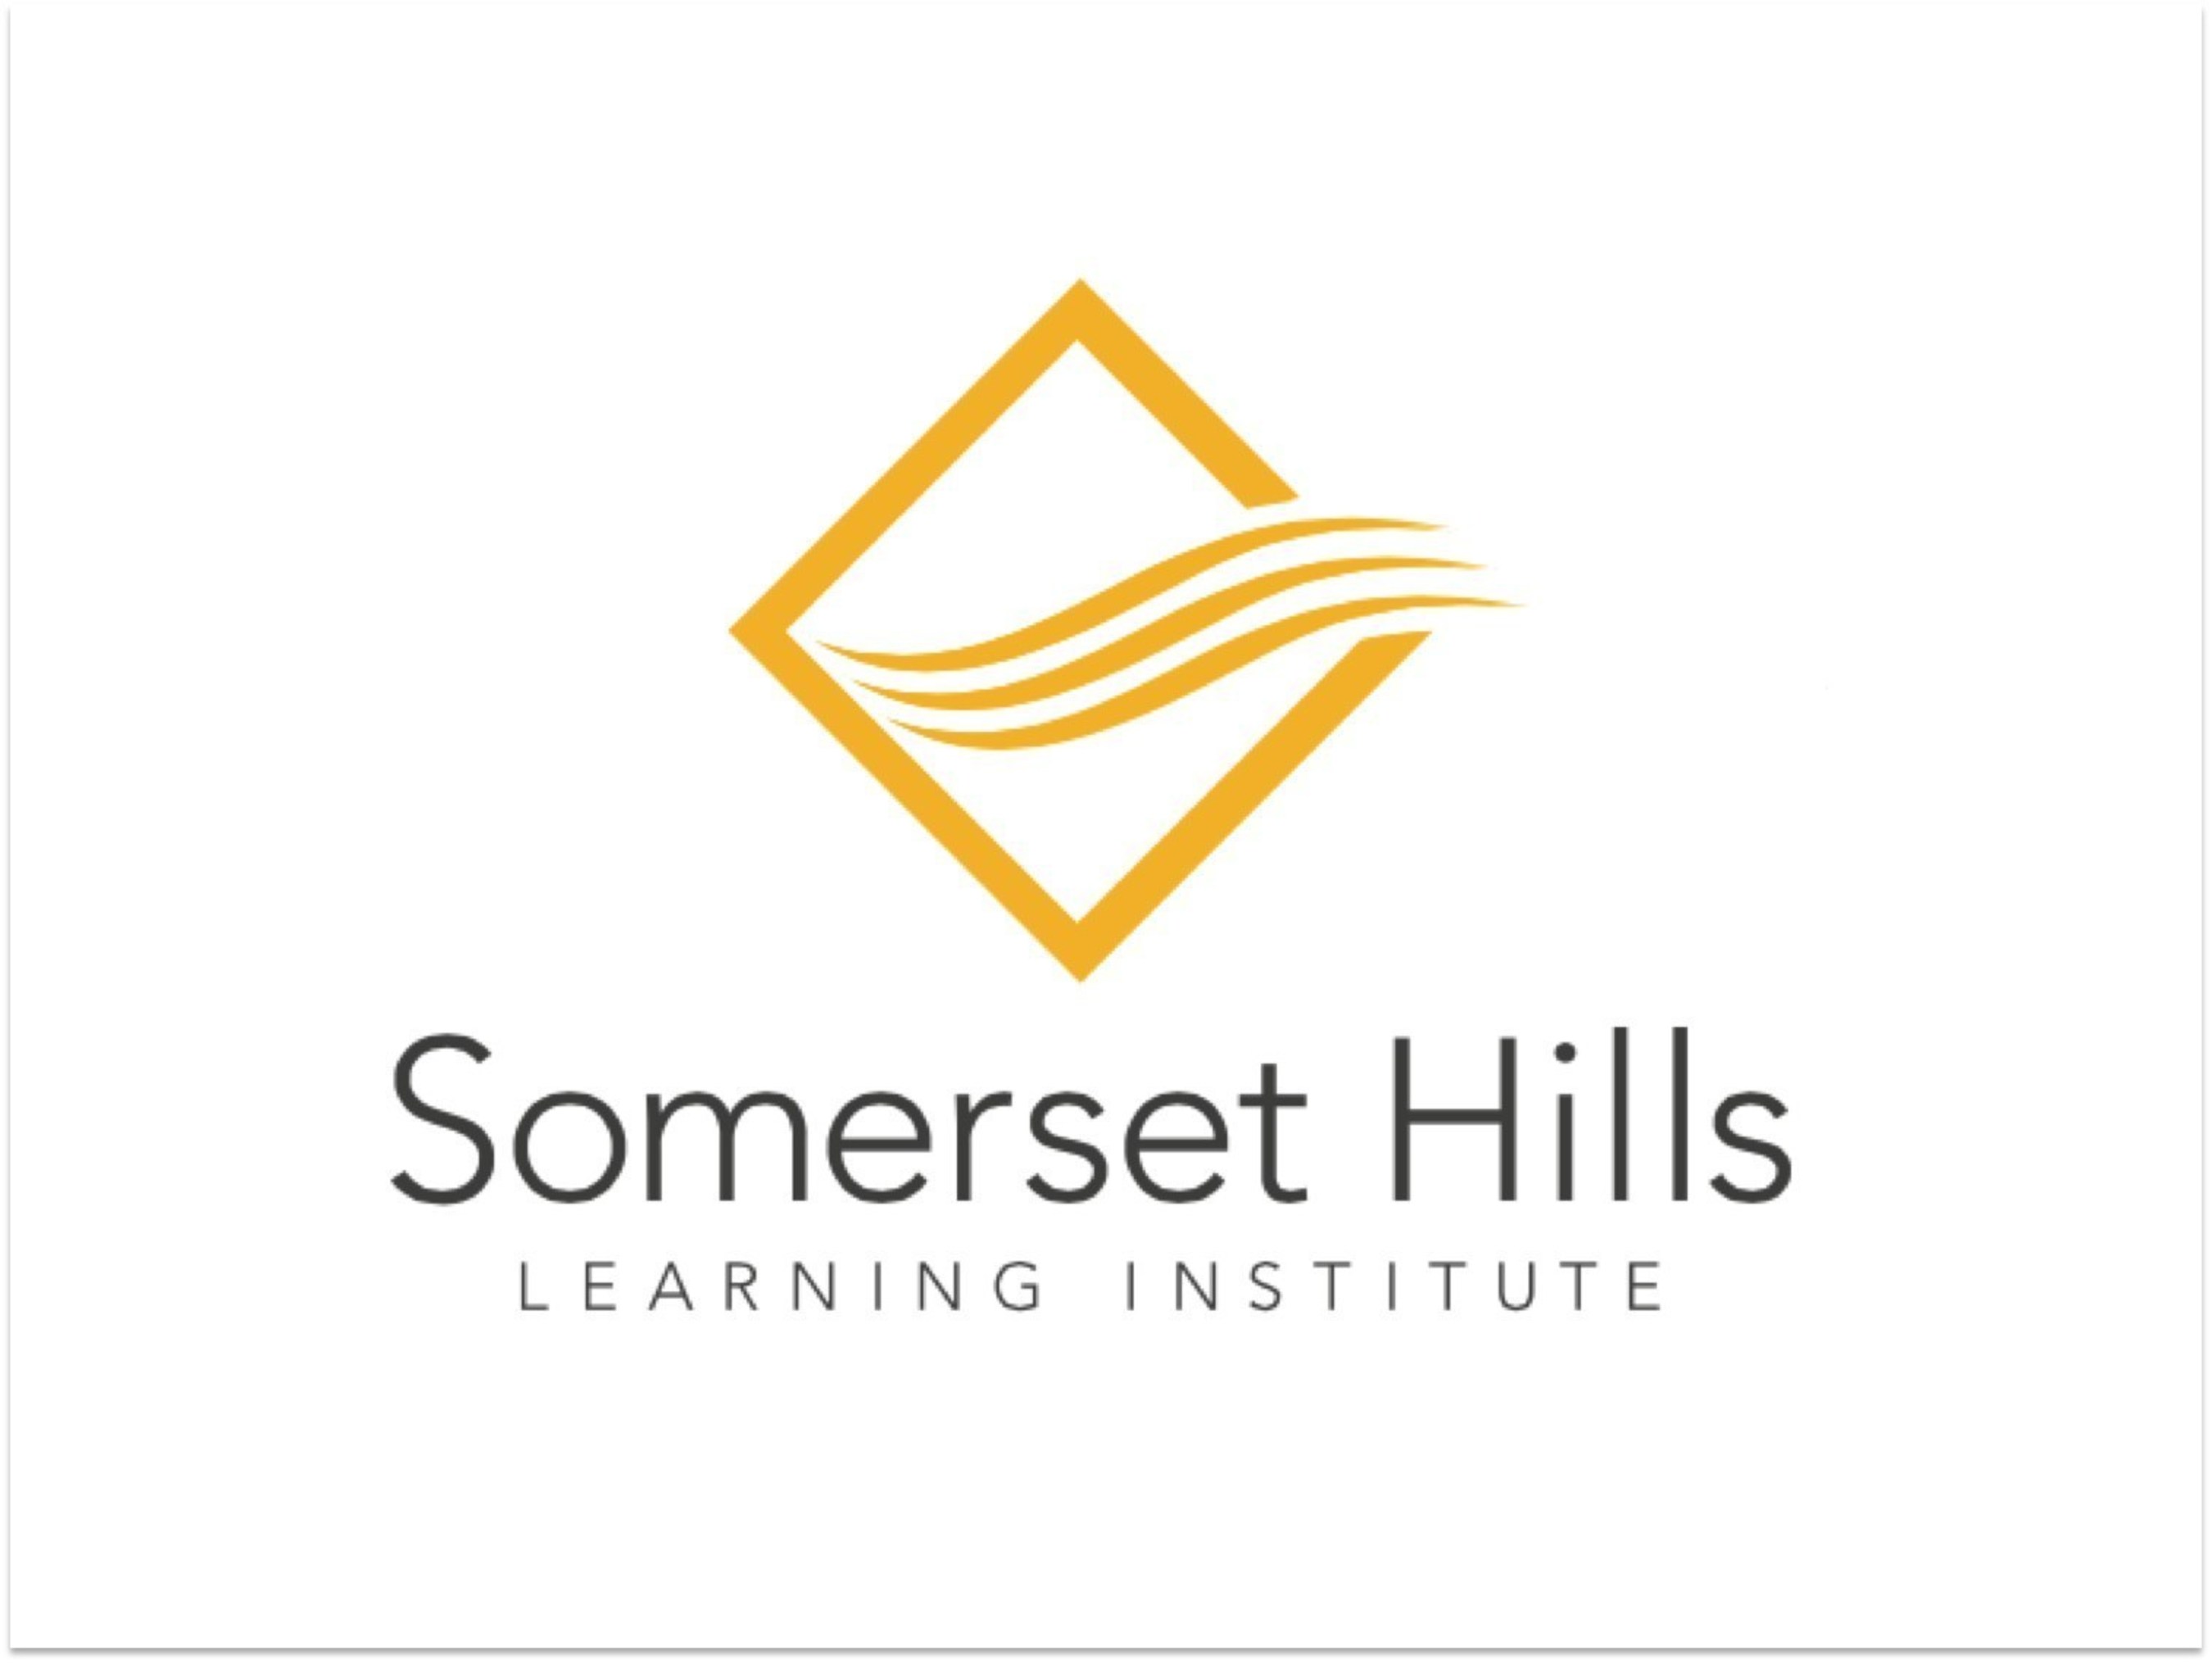 At Somerset Hills Learning Institute, we seek to make an impact on the autism community through the implementation of Applied Behavior Analysis (ABA) practices. Our program standards are based on years of scientific data and evidence and have proven positive outcomes.